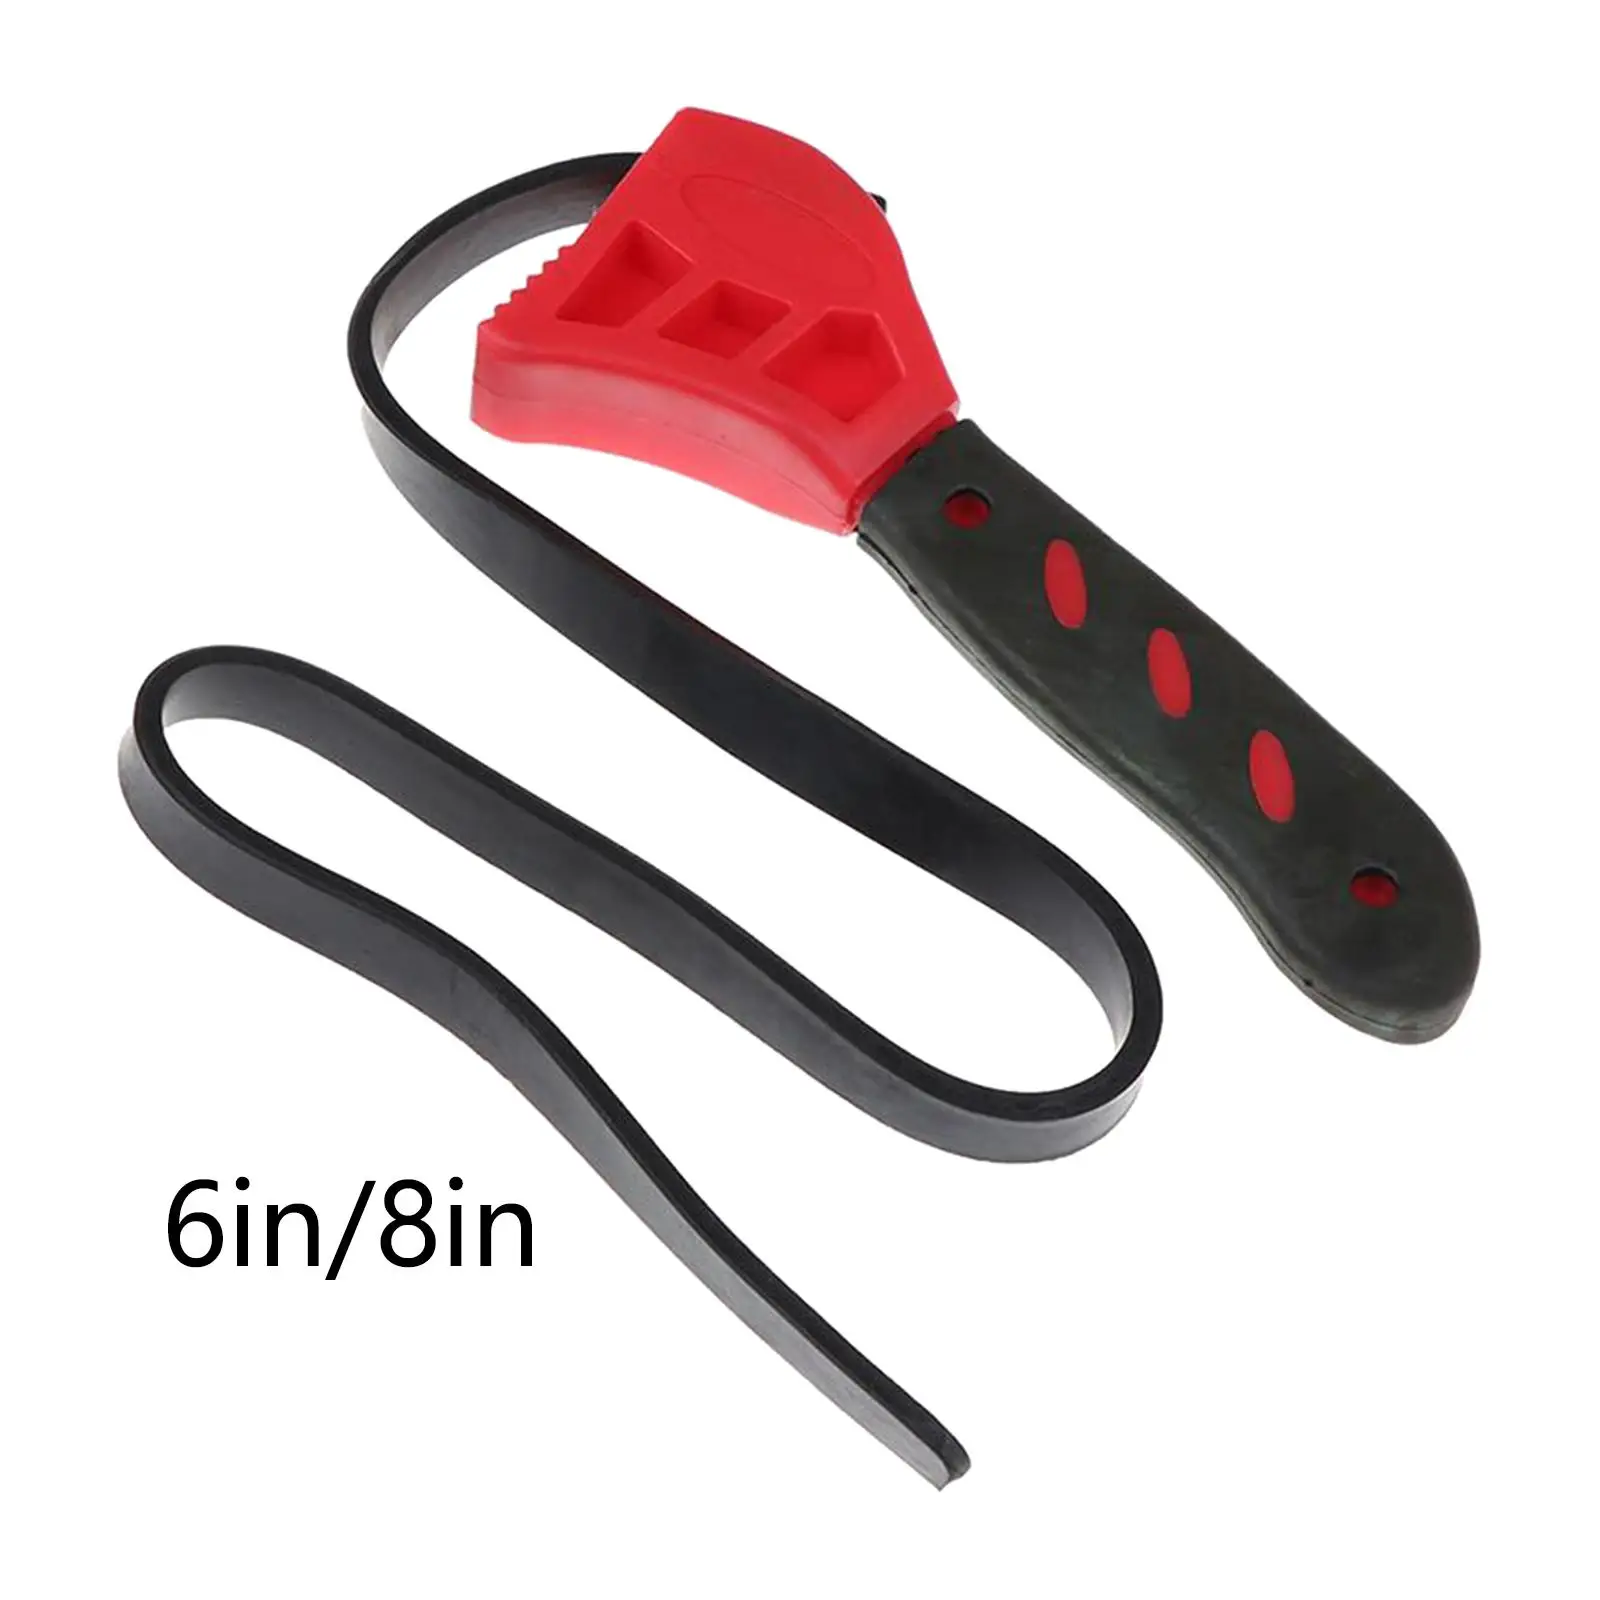 Flexible Adjustable Wrench Multipurpose Fittings Rubber Strap Wrench for Filters